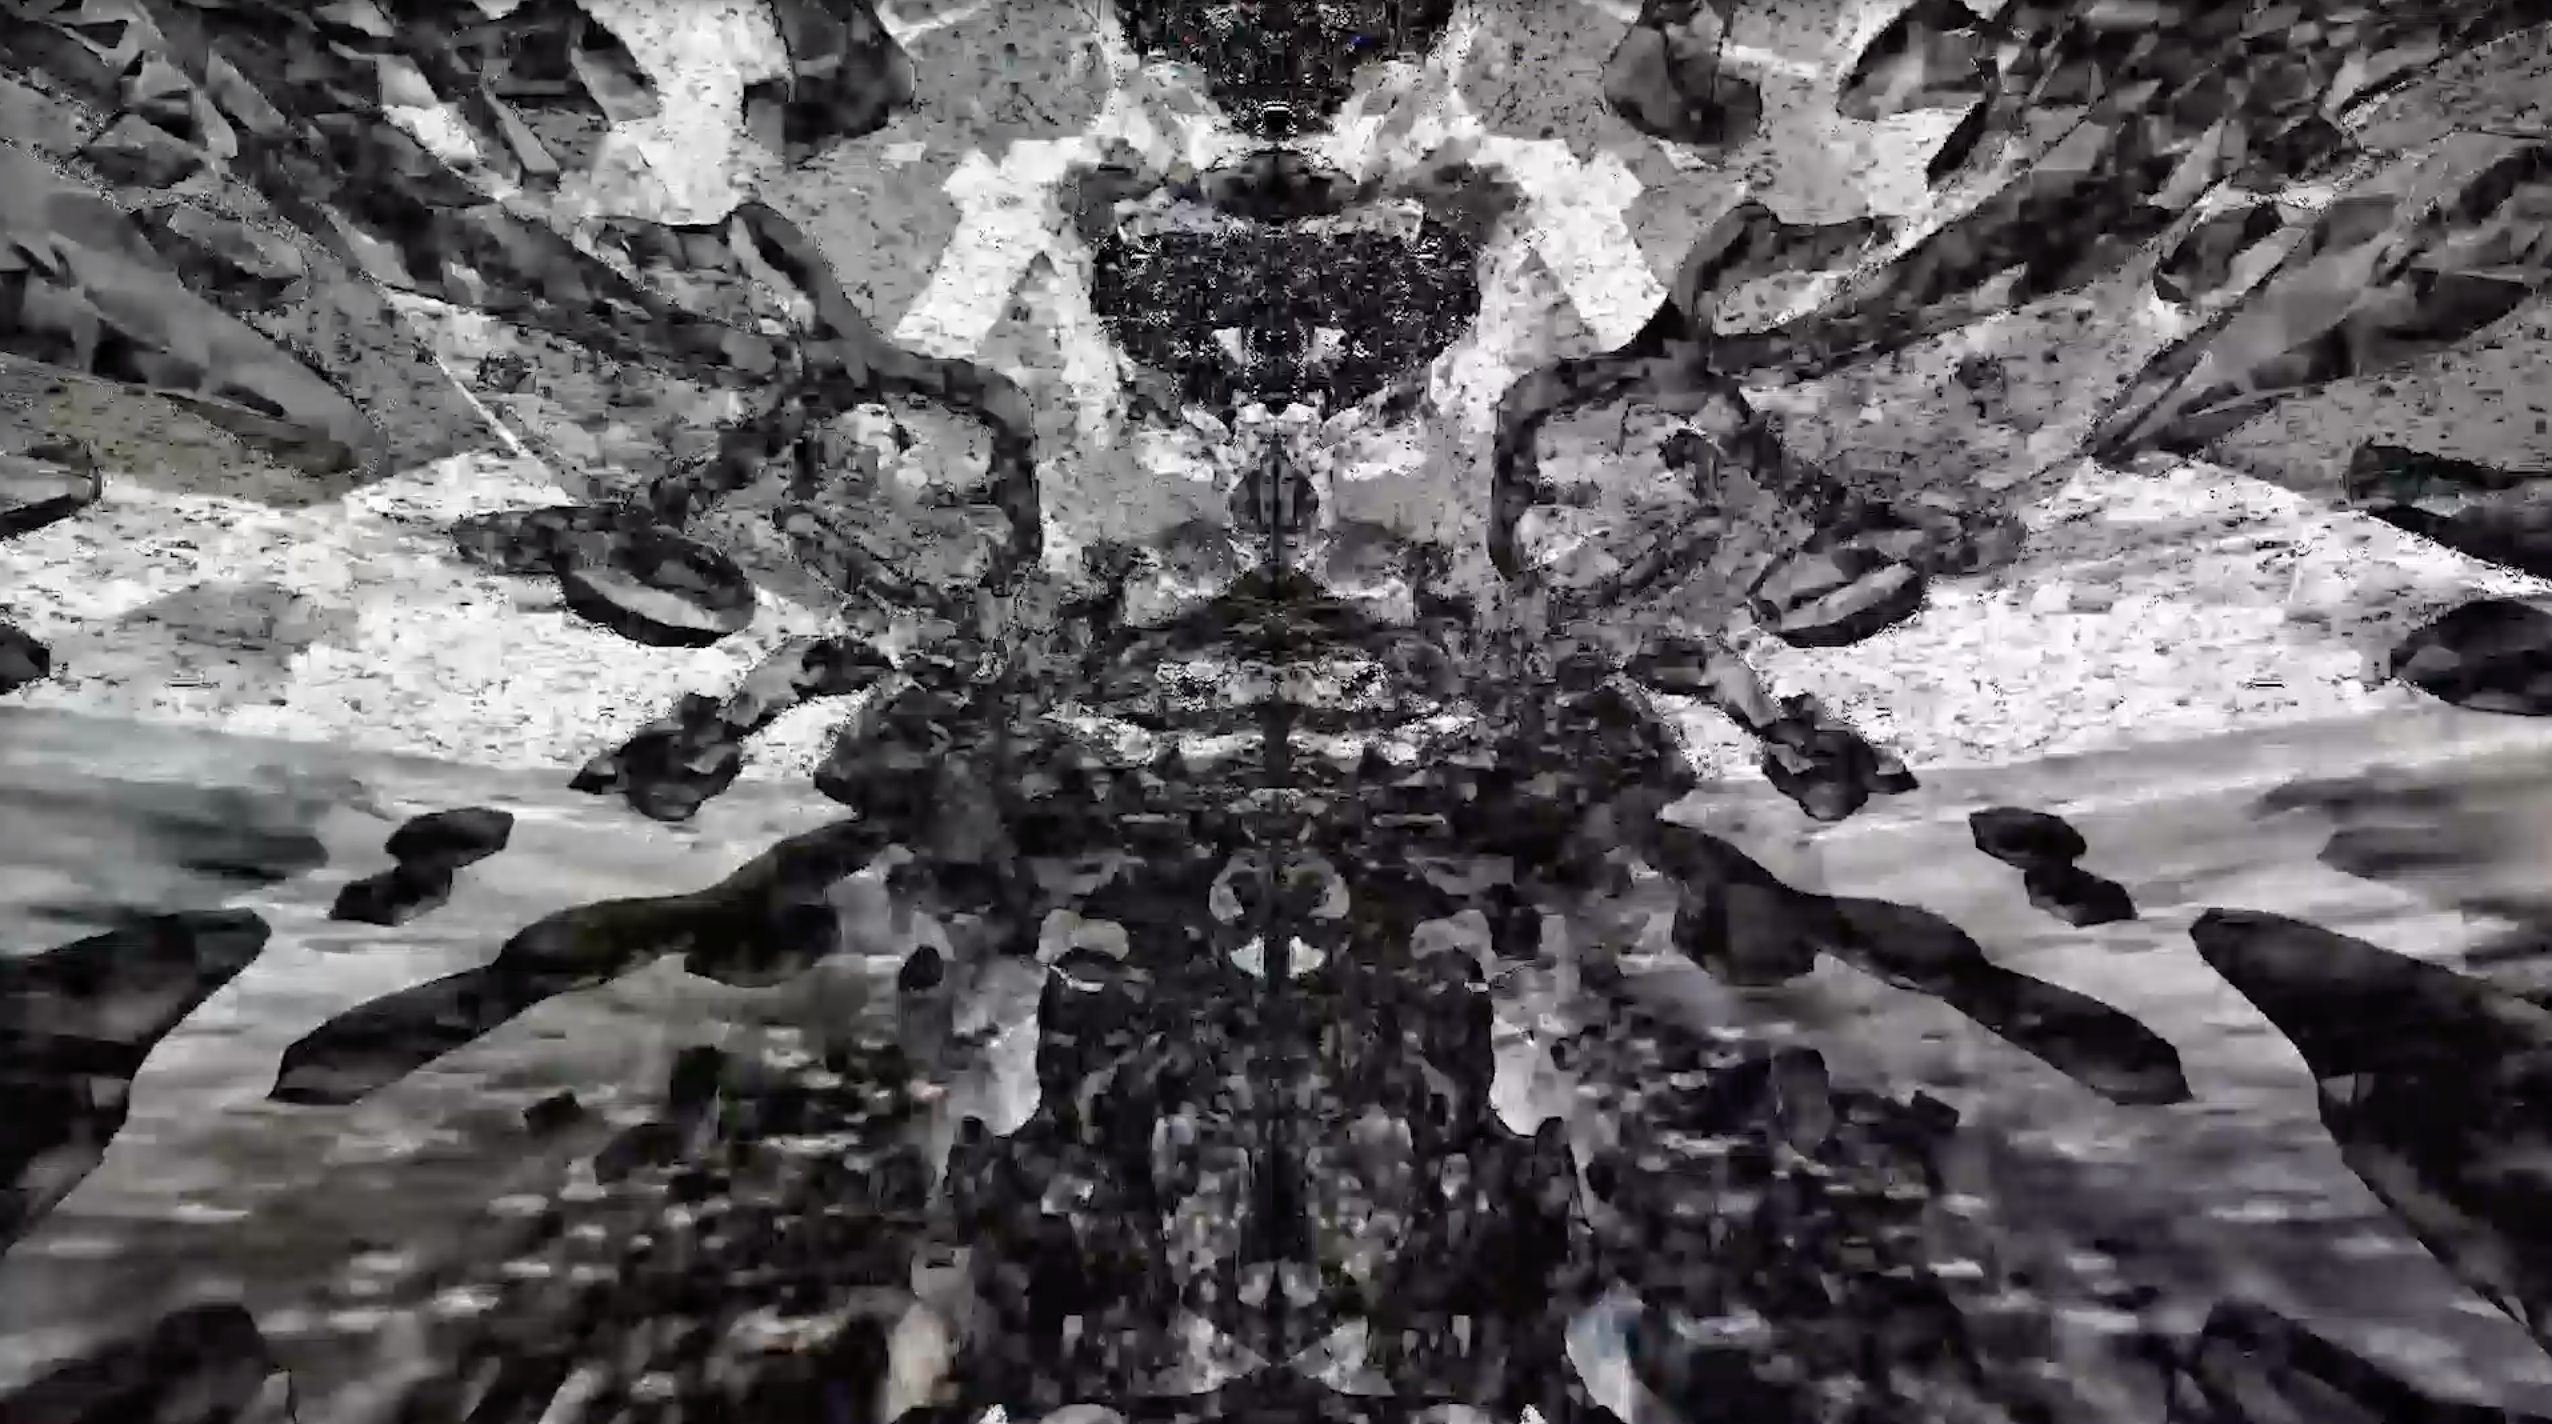 a black and white image of glitchy, 3D rendered water, reflected across the vertical axis; the water droplets are splashing outward to the edge of the image from the center and are grey and black on a white and grey background